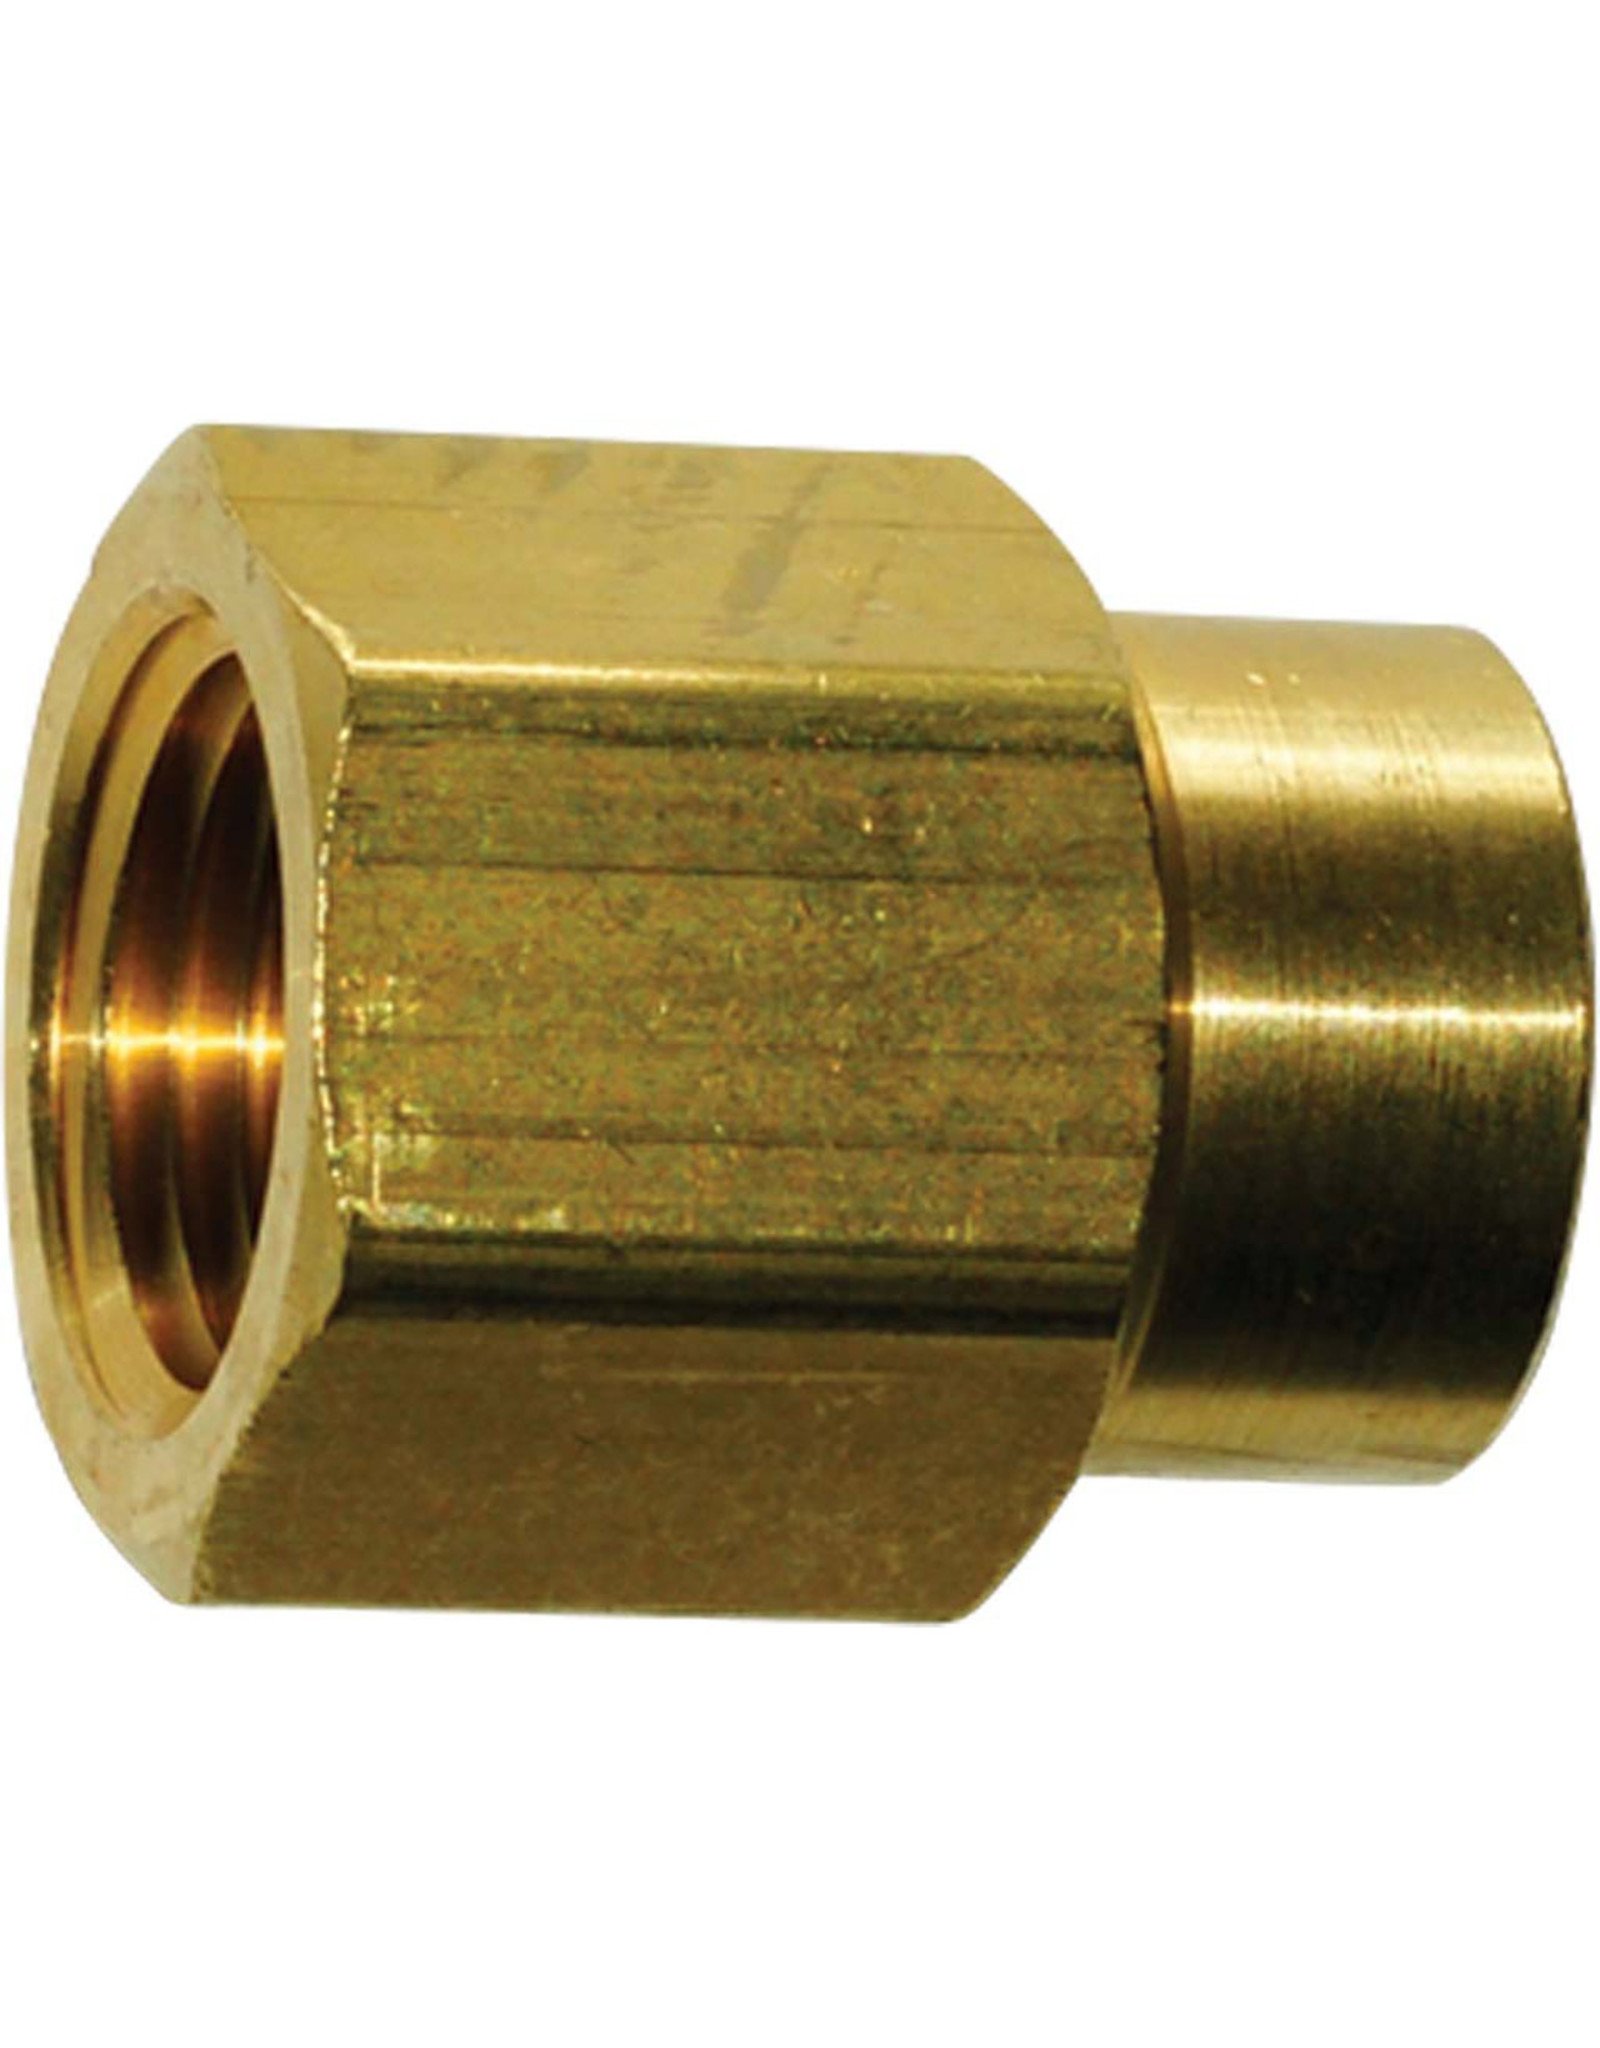 Coupler Reducing 3/8" FPT x 1/2" FPT